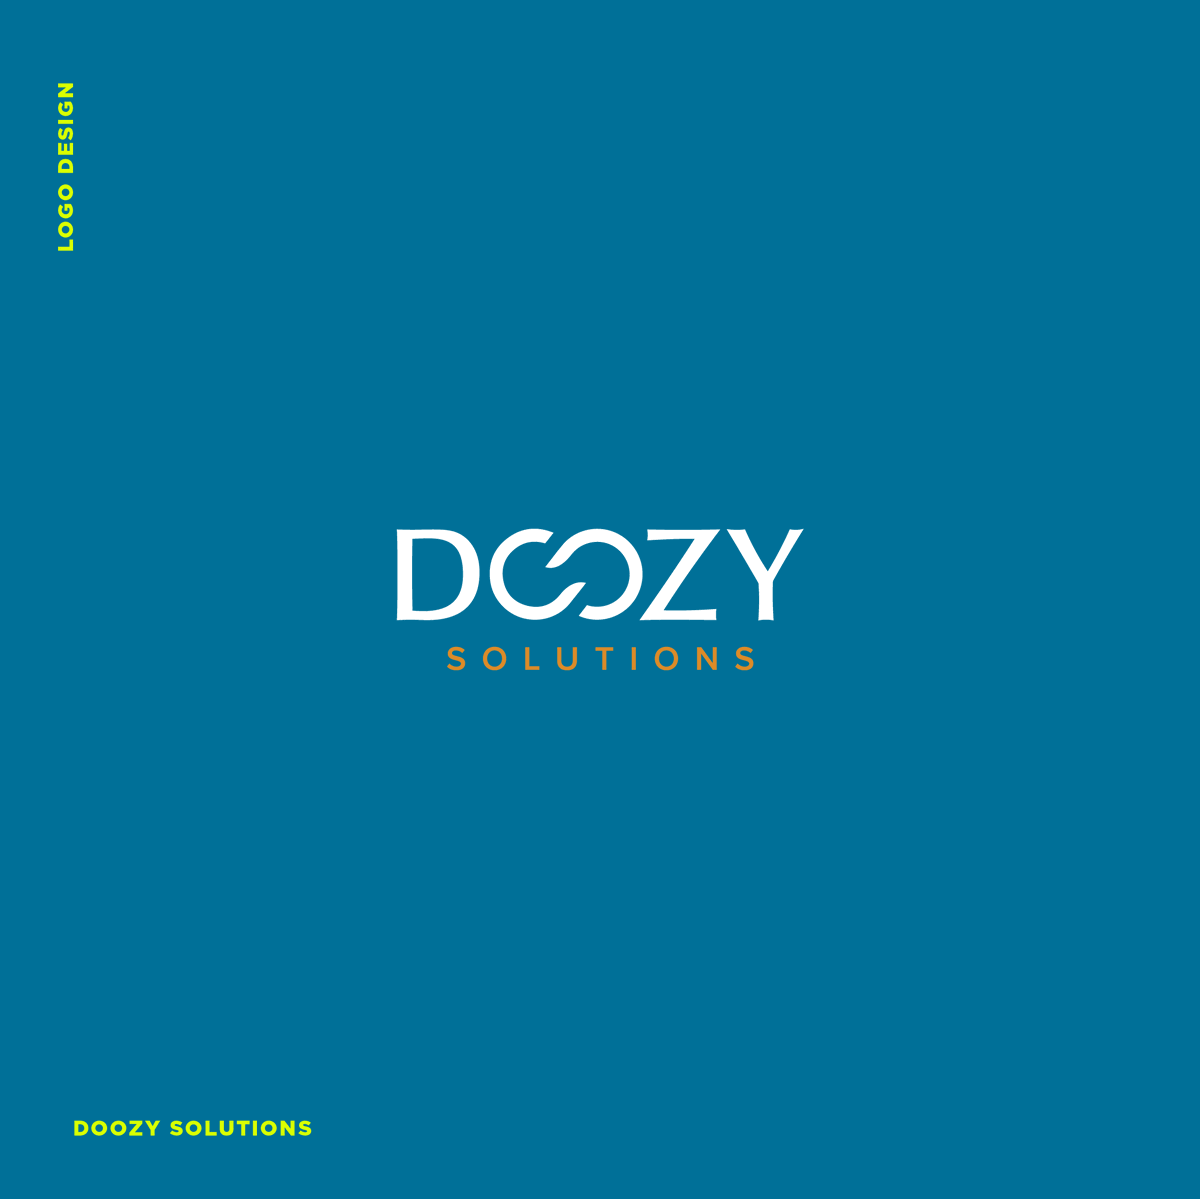 Doozy Solutions is a NetSuite consultant firm based out of Denver, CO. The logo design was inspired by their end-to-end, all-in-one system that integrates every aspect of their client's business. #logodesign #branding #graphicdesign #denver #mcandmc #logo #printdesign